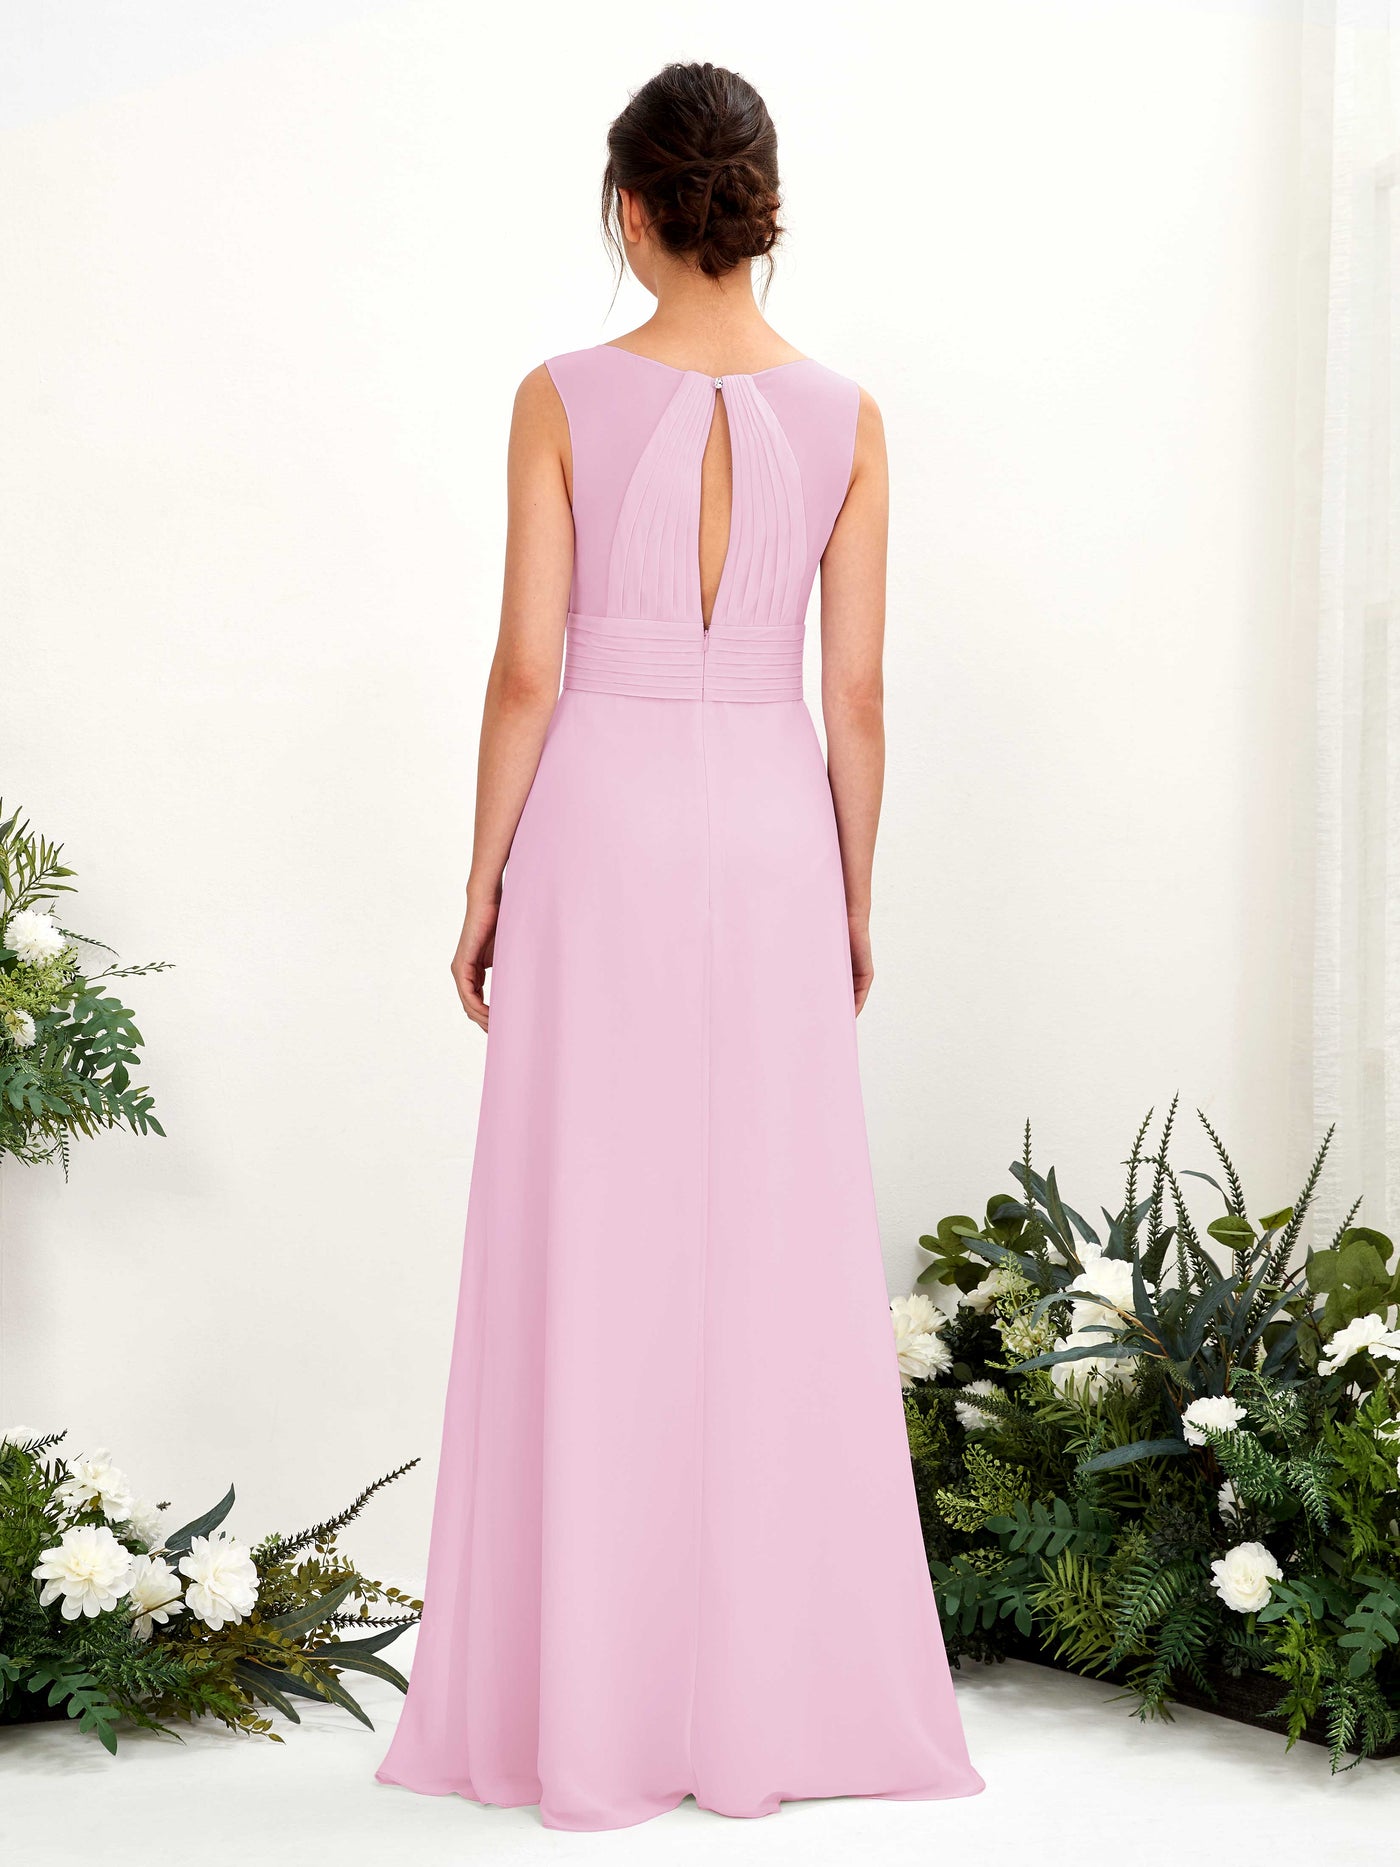 Candy Pink Bridesmaid Dresses Bridesmaid Dress A-line Chiffon Straps Full Length Sleeveless Wedding Party Dress (81220939)#color_candy-pink